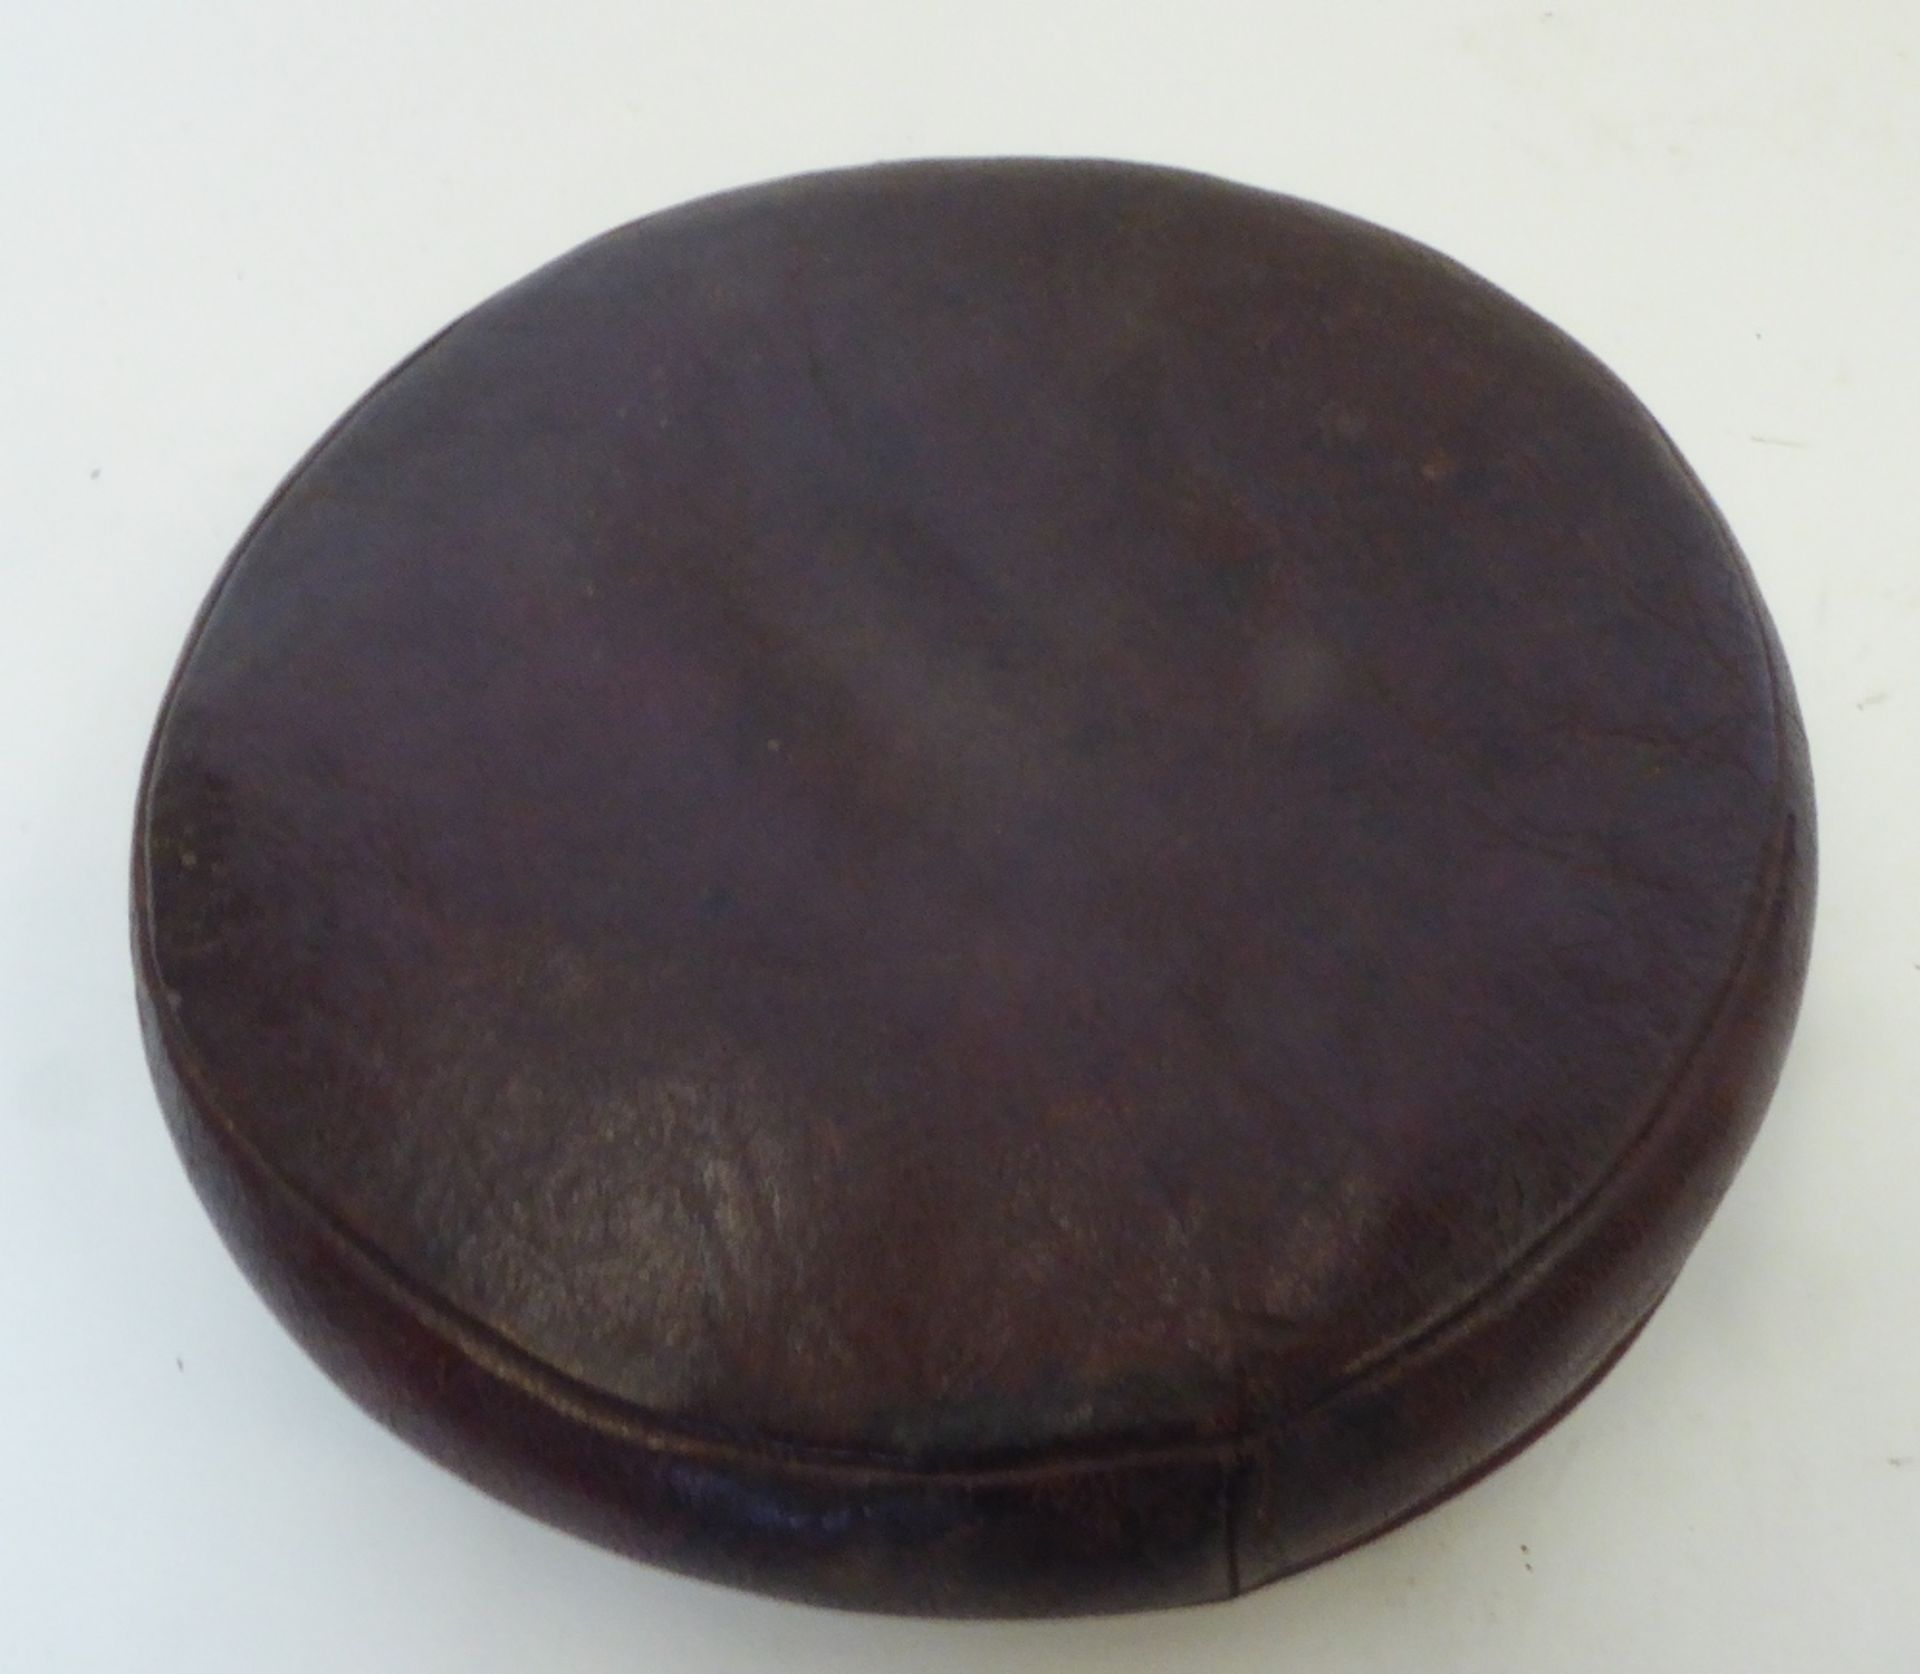 Leather horse buffer (view in security pen) - Image 2 of 2